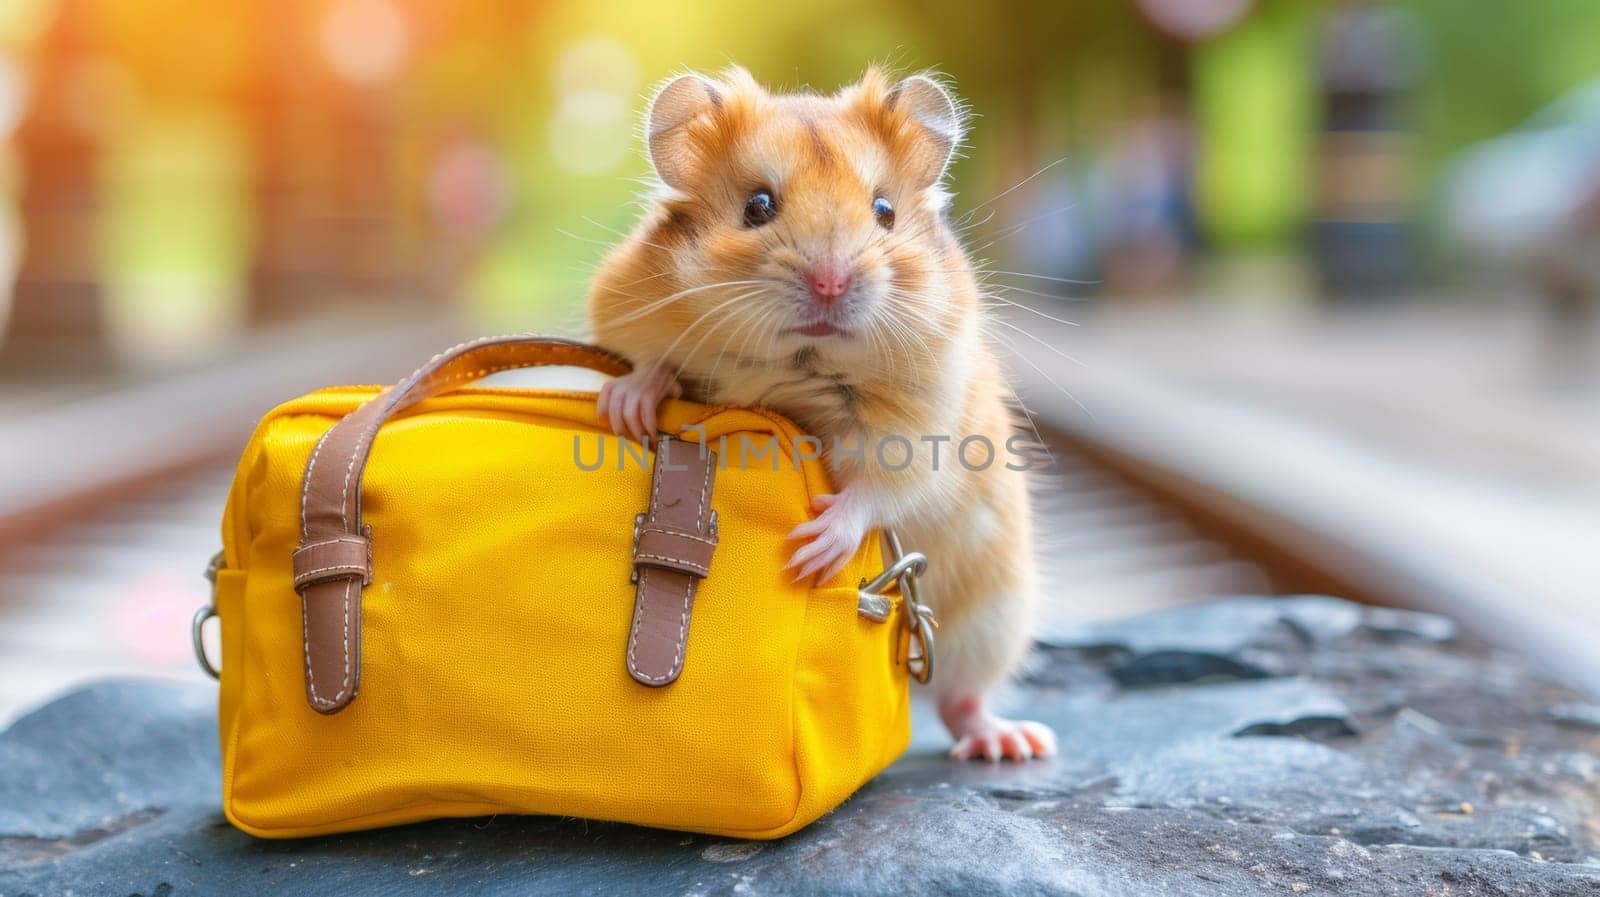 A hamster with yellow bag on a rock near train tracks, AI by starush